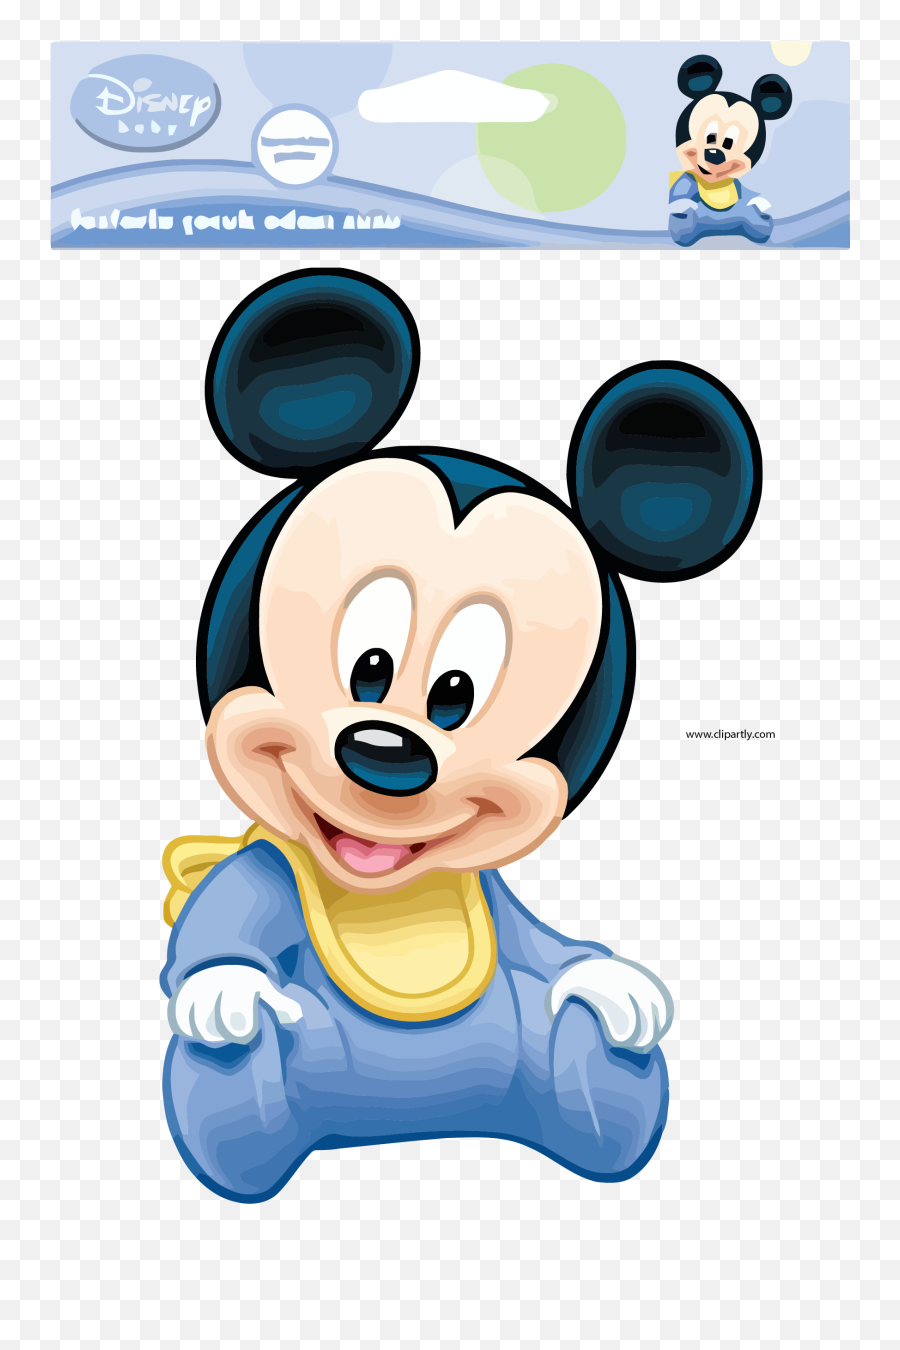 Baby Mickey Mouse - Baby Mickey Mouse Jpg Emoji,Mickey Mouse Png